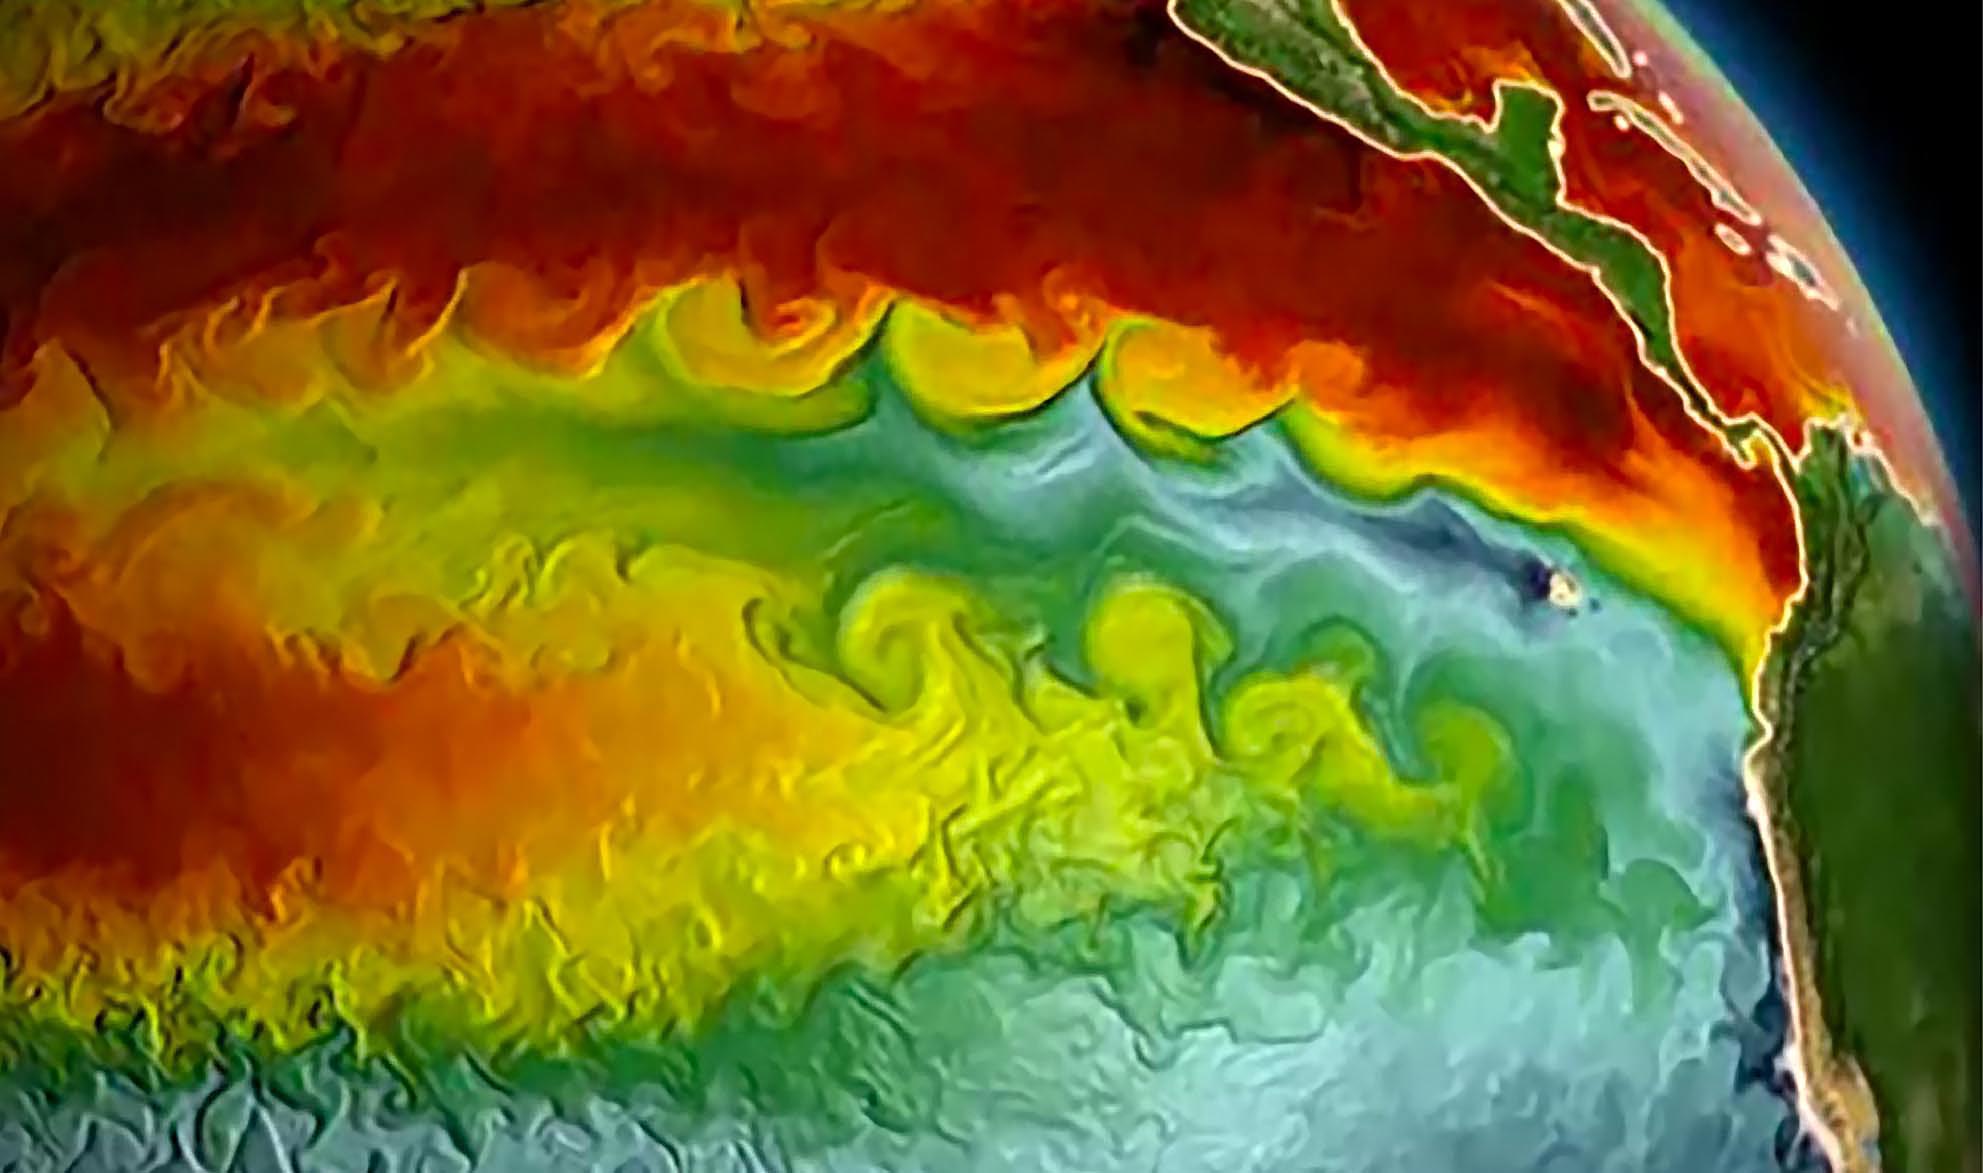 Mathematicians from UMD have developed the first rigorous proof for a fundamental law of turbulence. Batchelor’s law, which helps explain how chemical concentrations and temperature variations distribute themselves in a fluid, can be seen at work in the variously sized swirls of mixing warm and cold ocean water. Image Credit: NOAA/Geophysical Fluid Dynamics Laboratory